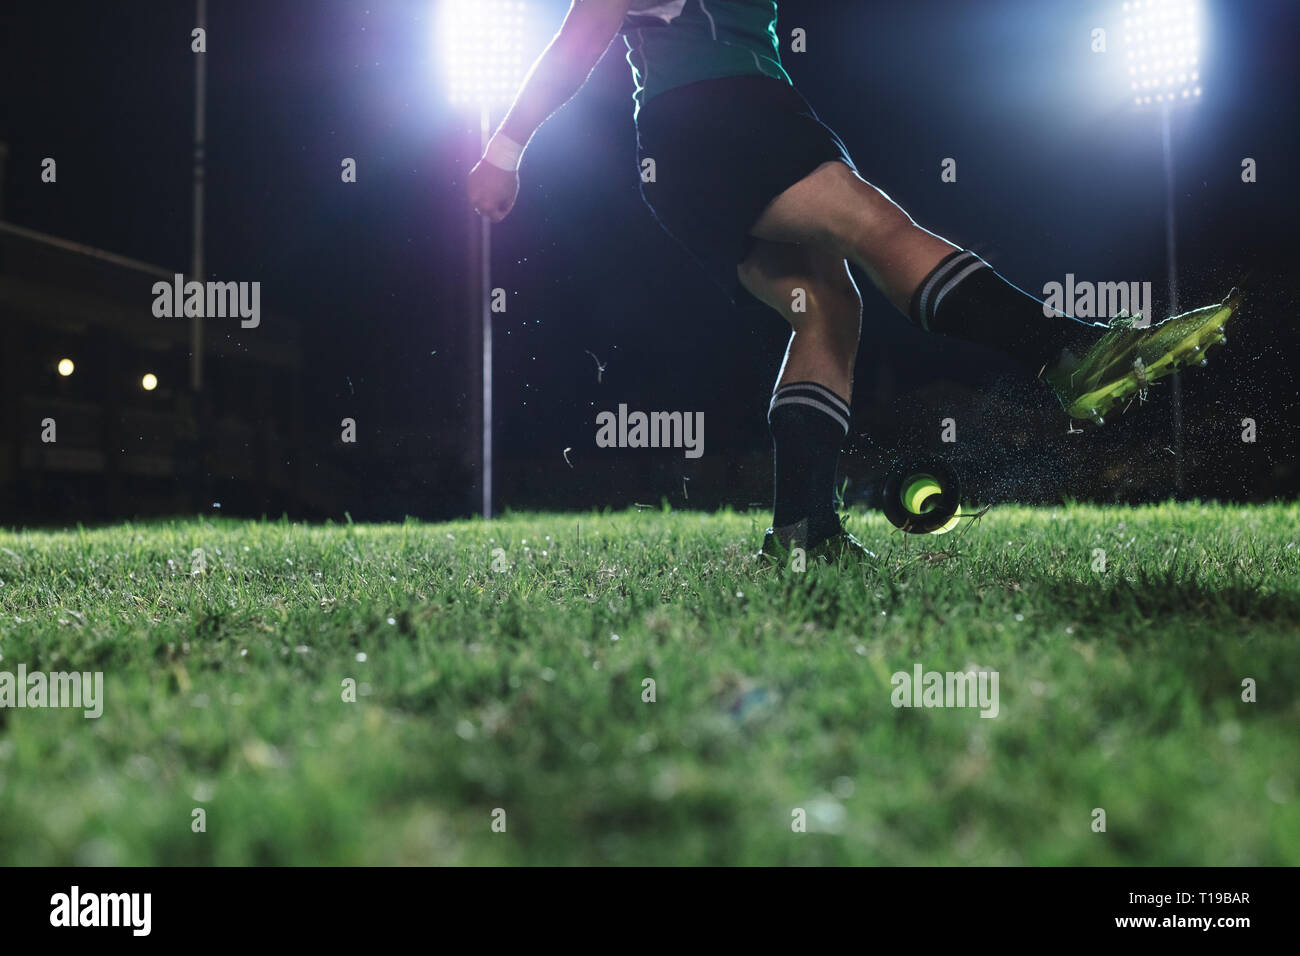 rugby player kicking the ball from a tee for penalty shot. Legs of professional rugby player kicking the ball under lights at rugby stadium at night. Stock Photo